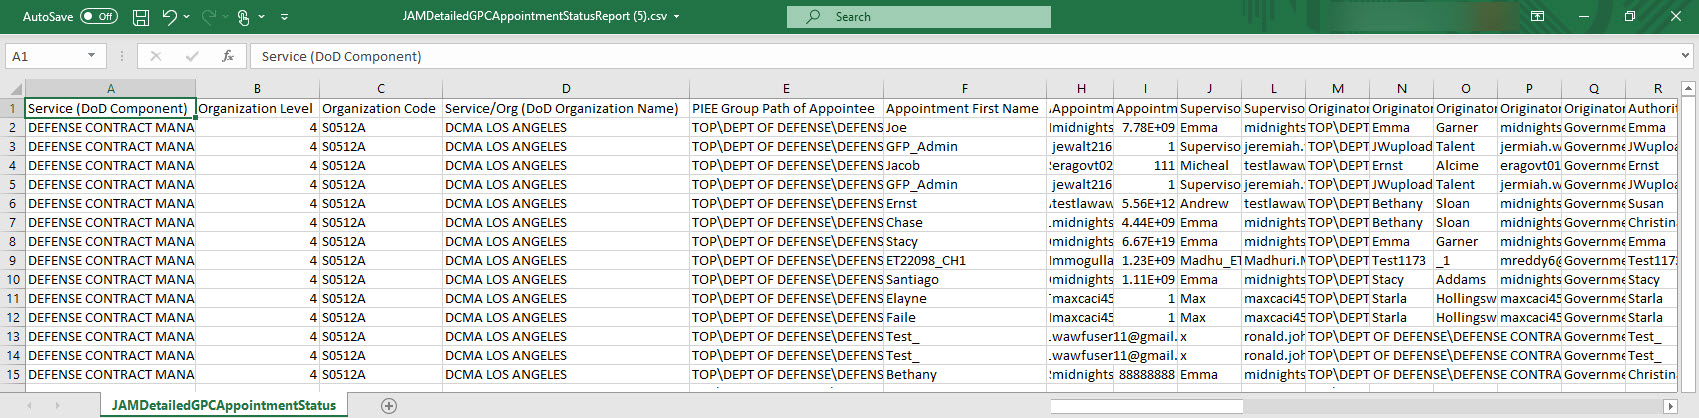 The image provides a preview of the JAM Detailed GPC Appointment Status Report Sample Export CSV Results.